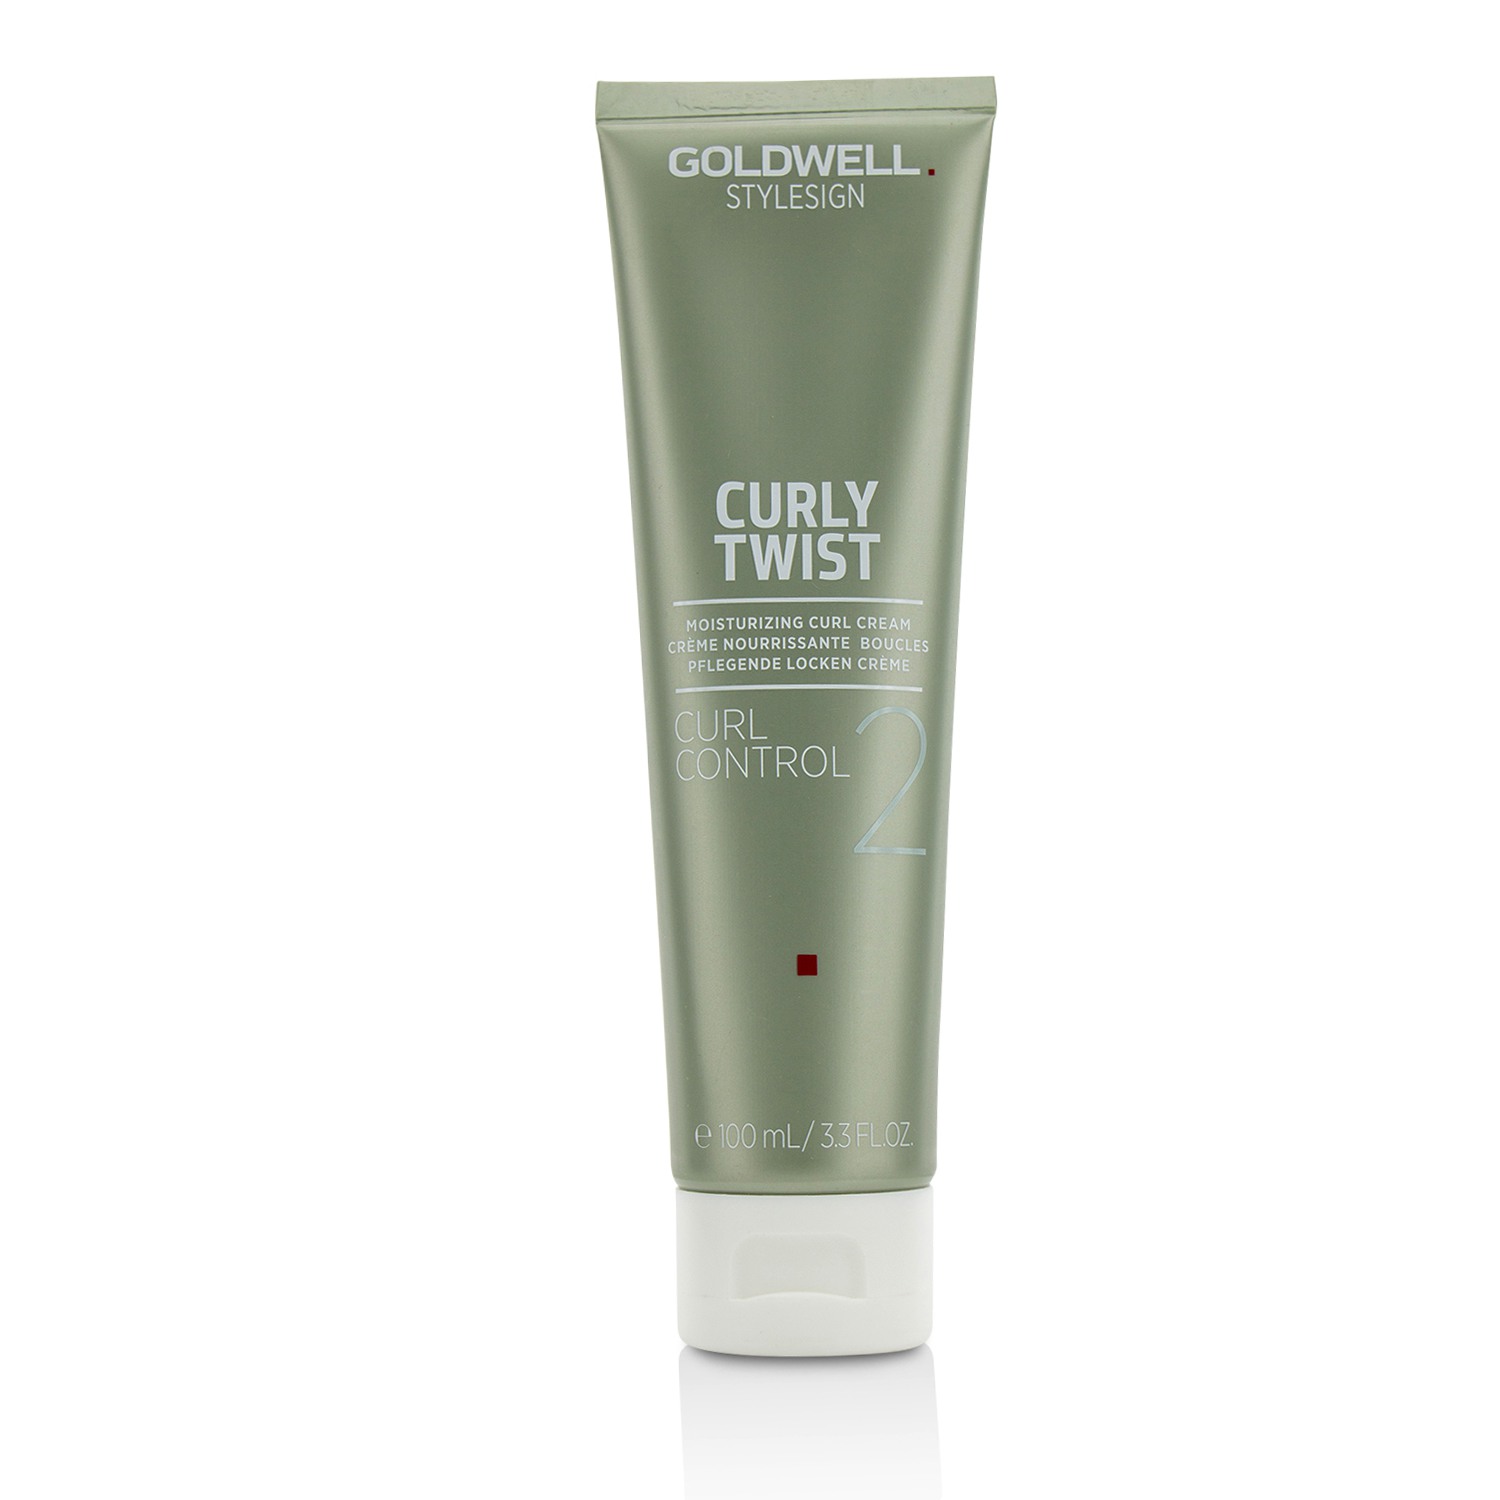 Style Sign Curly Twist Curl Control 2 Moisturizing Curl Cream Goldwell Image